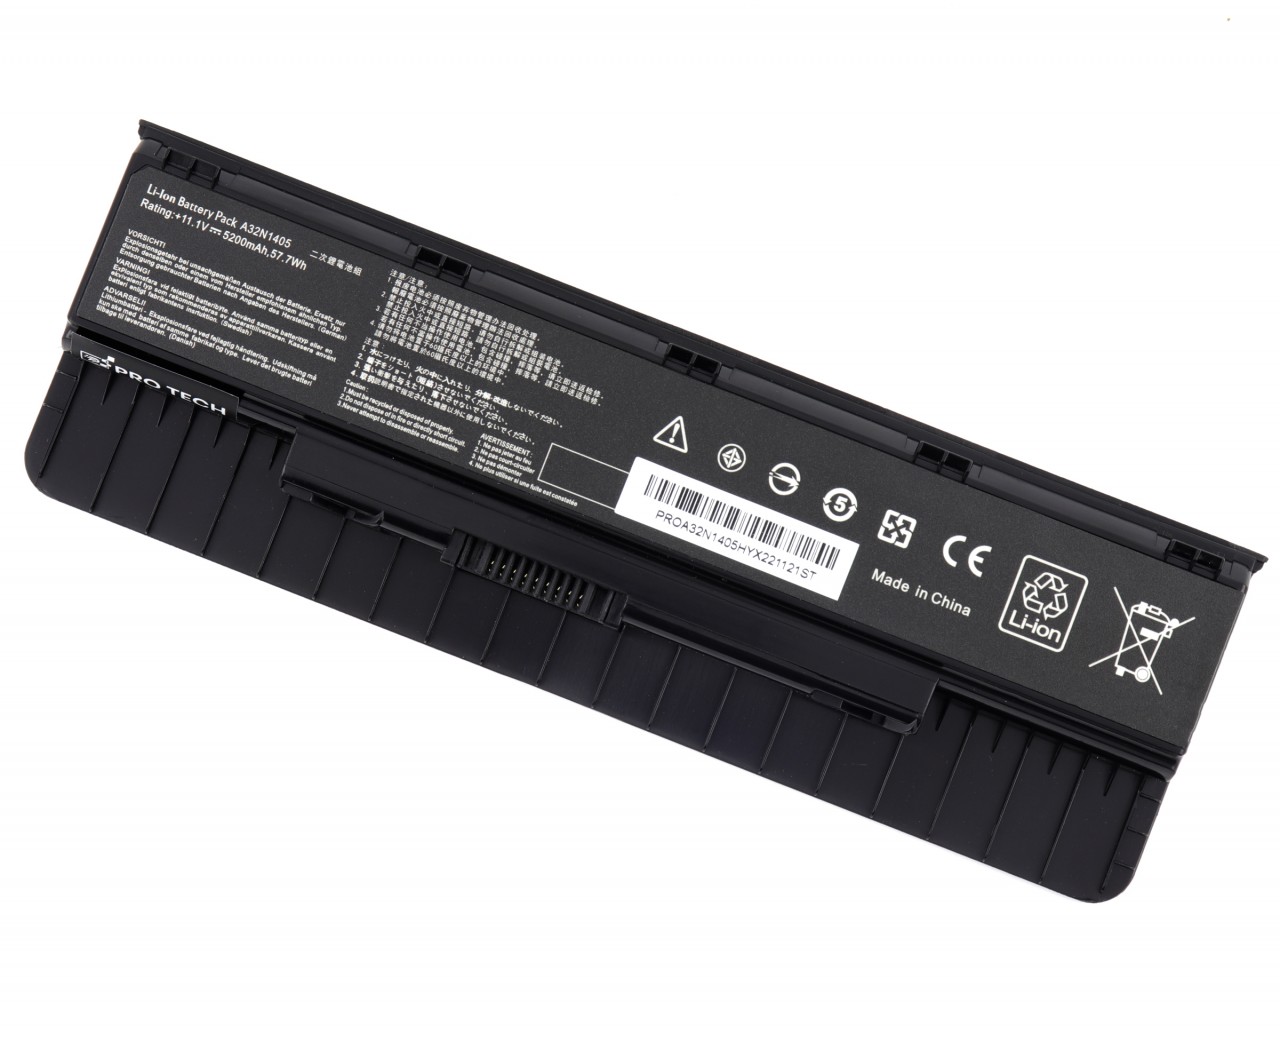 Baterie Asus B53v 57.7Wh / 5200mAh Protech High Quality Replacement